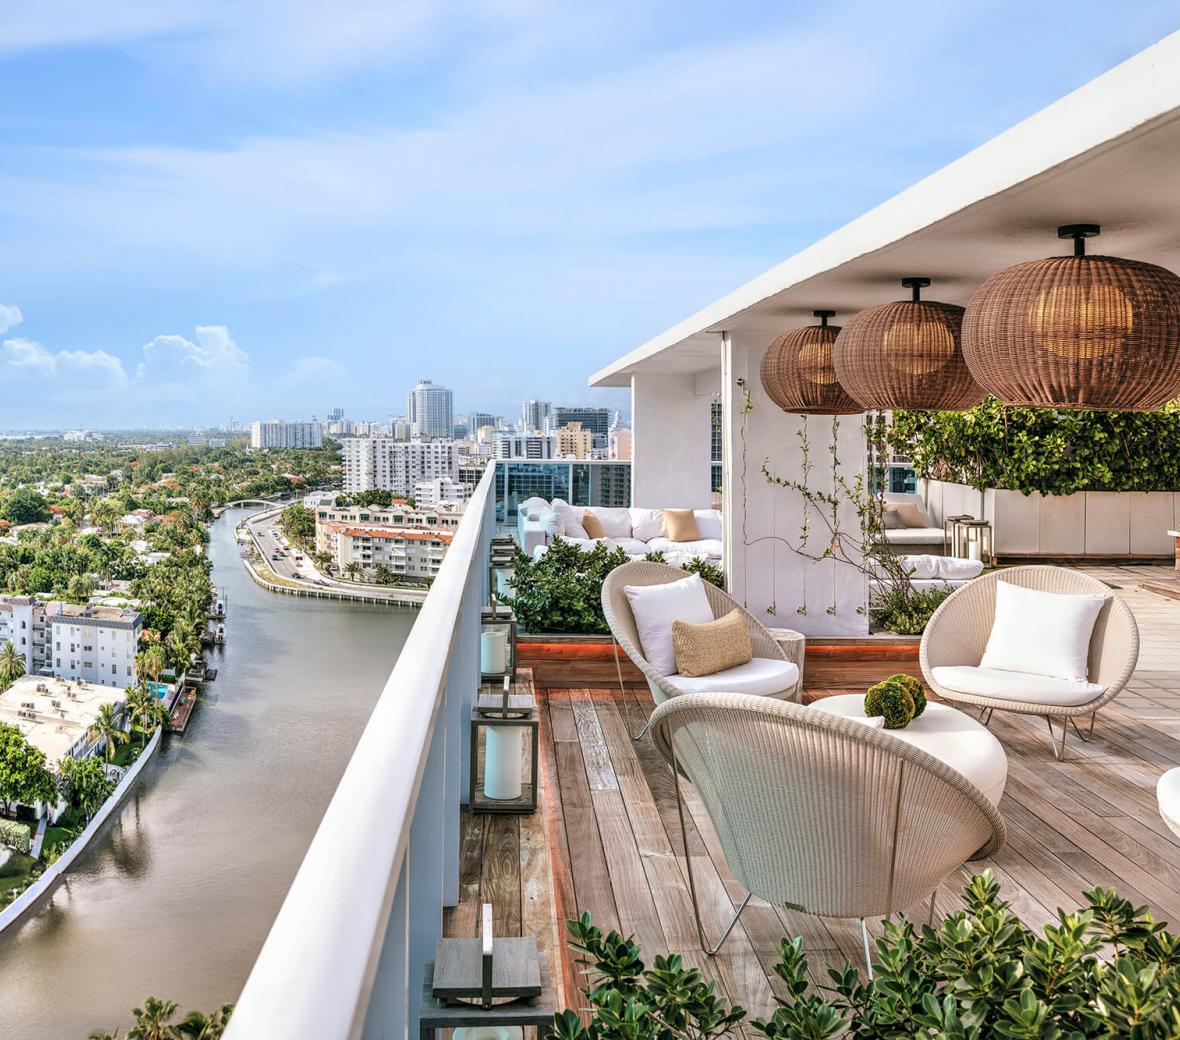 Terrace at a hotel with sofas and chairs overseeing the Miami landscape.